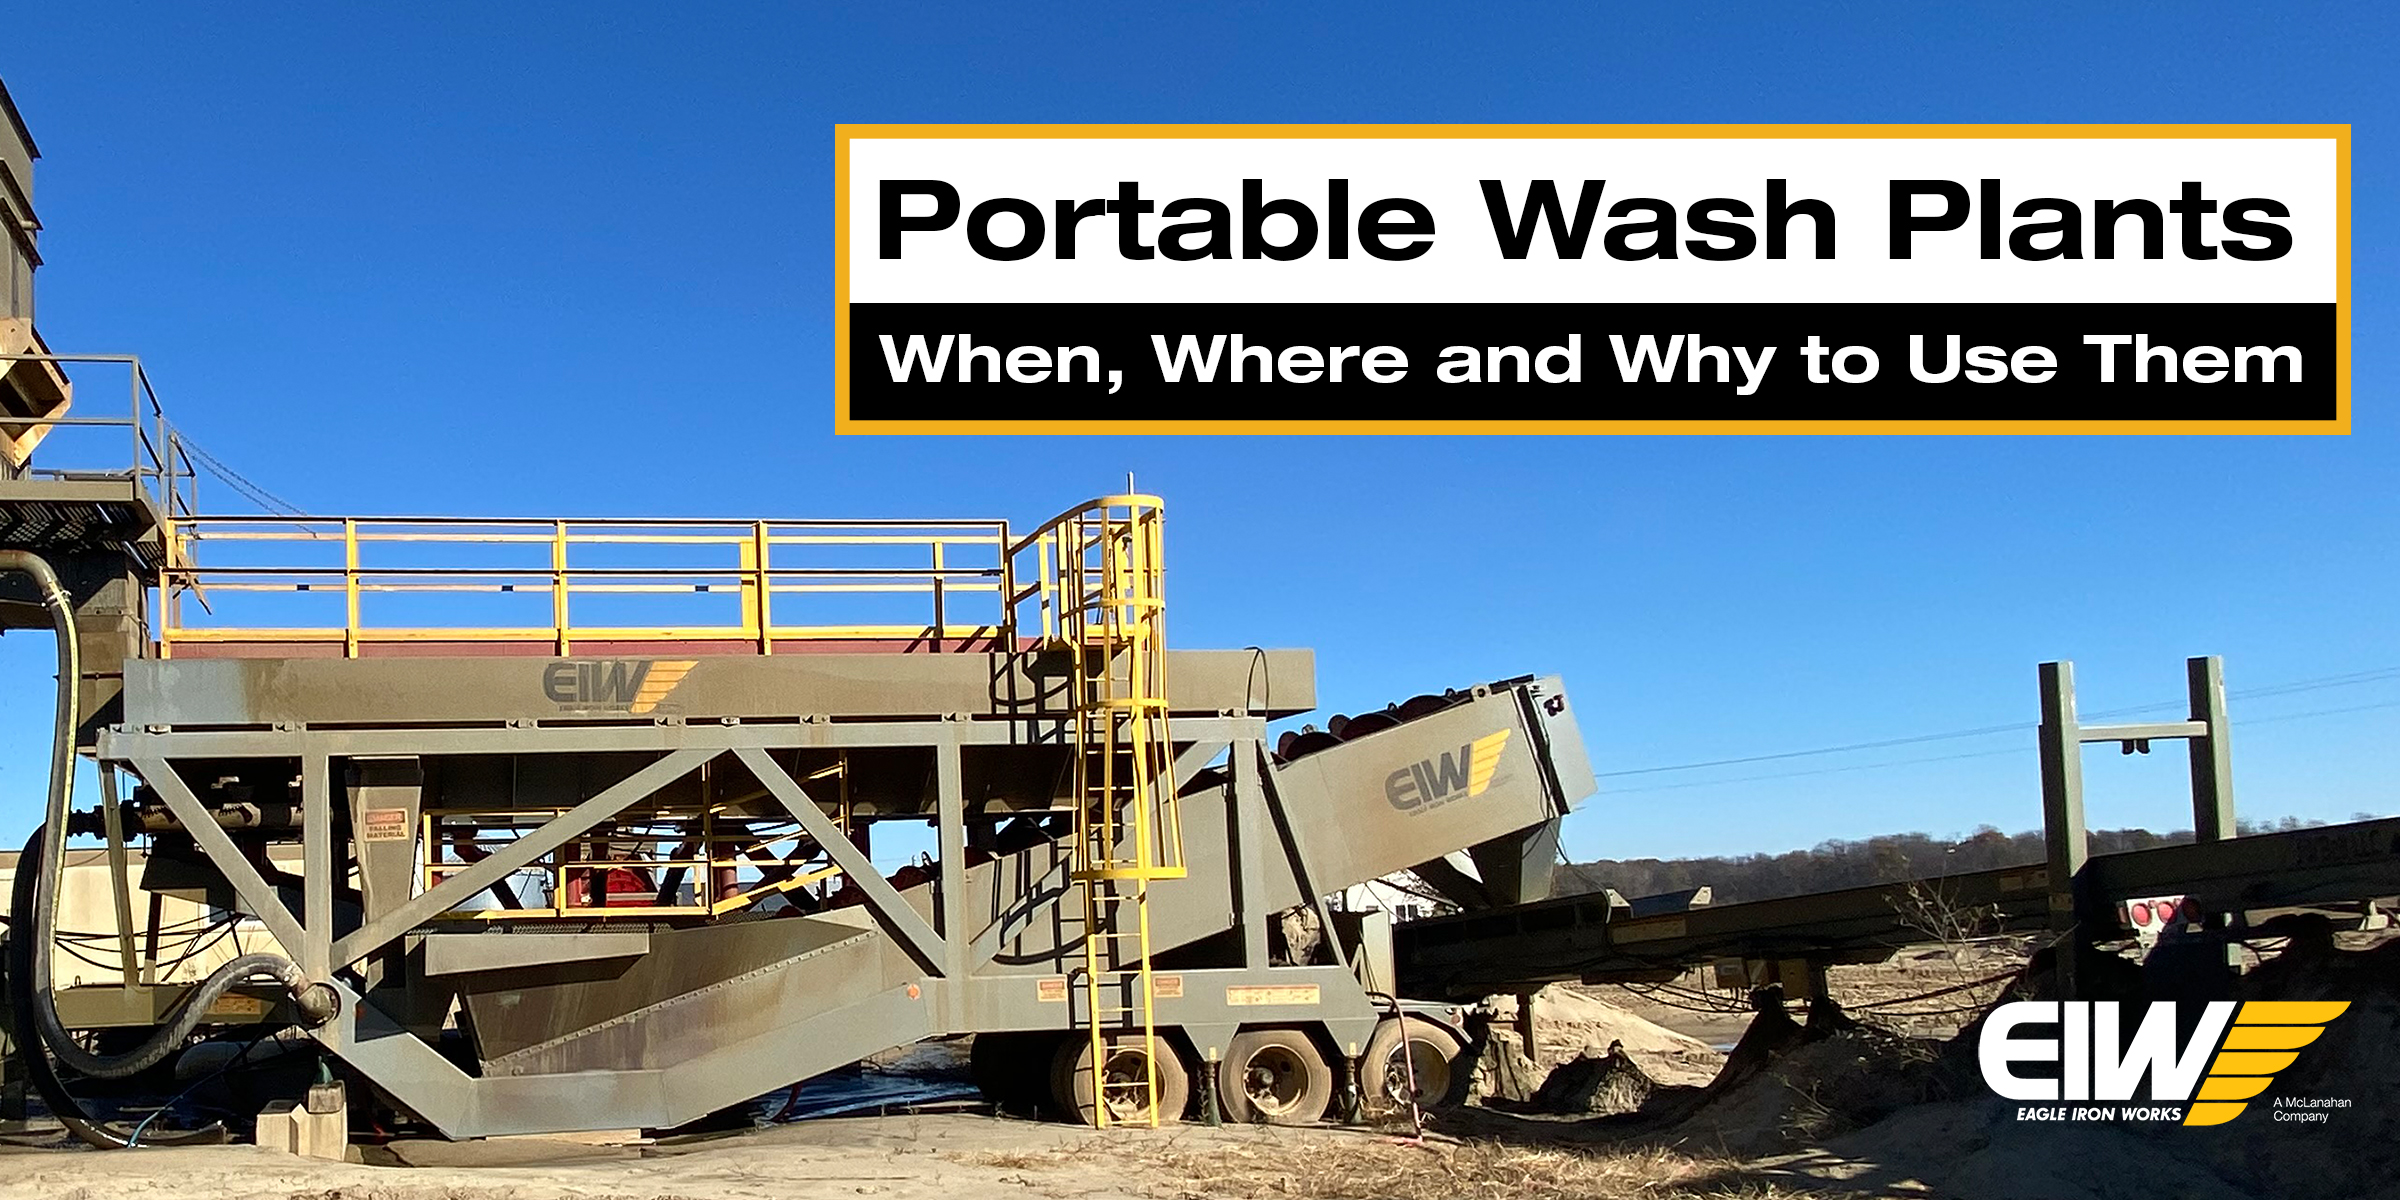 Portable Wash Plants: When, Where and Why to Use Them